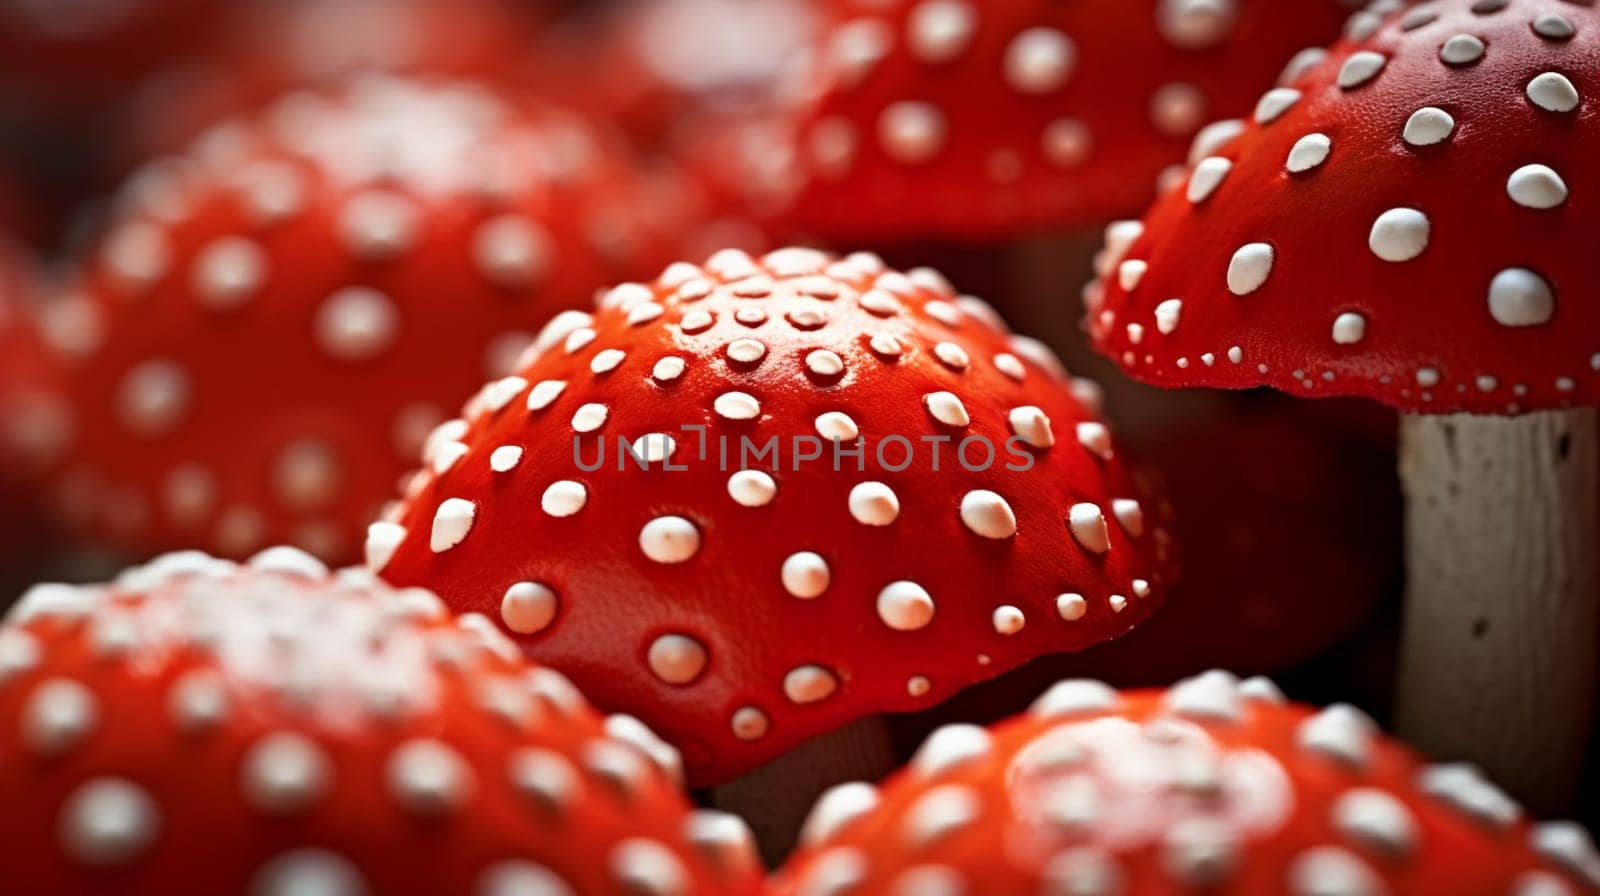 Vibrant red mushrooms with white spots, close-up, with a blurry background. High quality photo